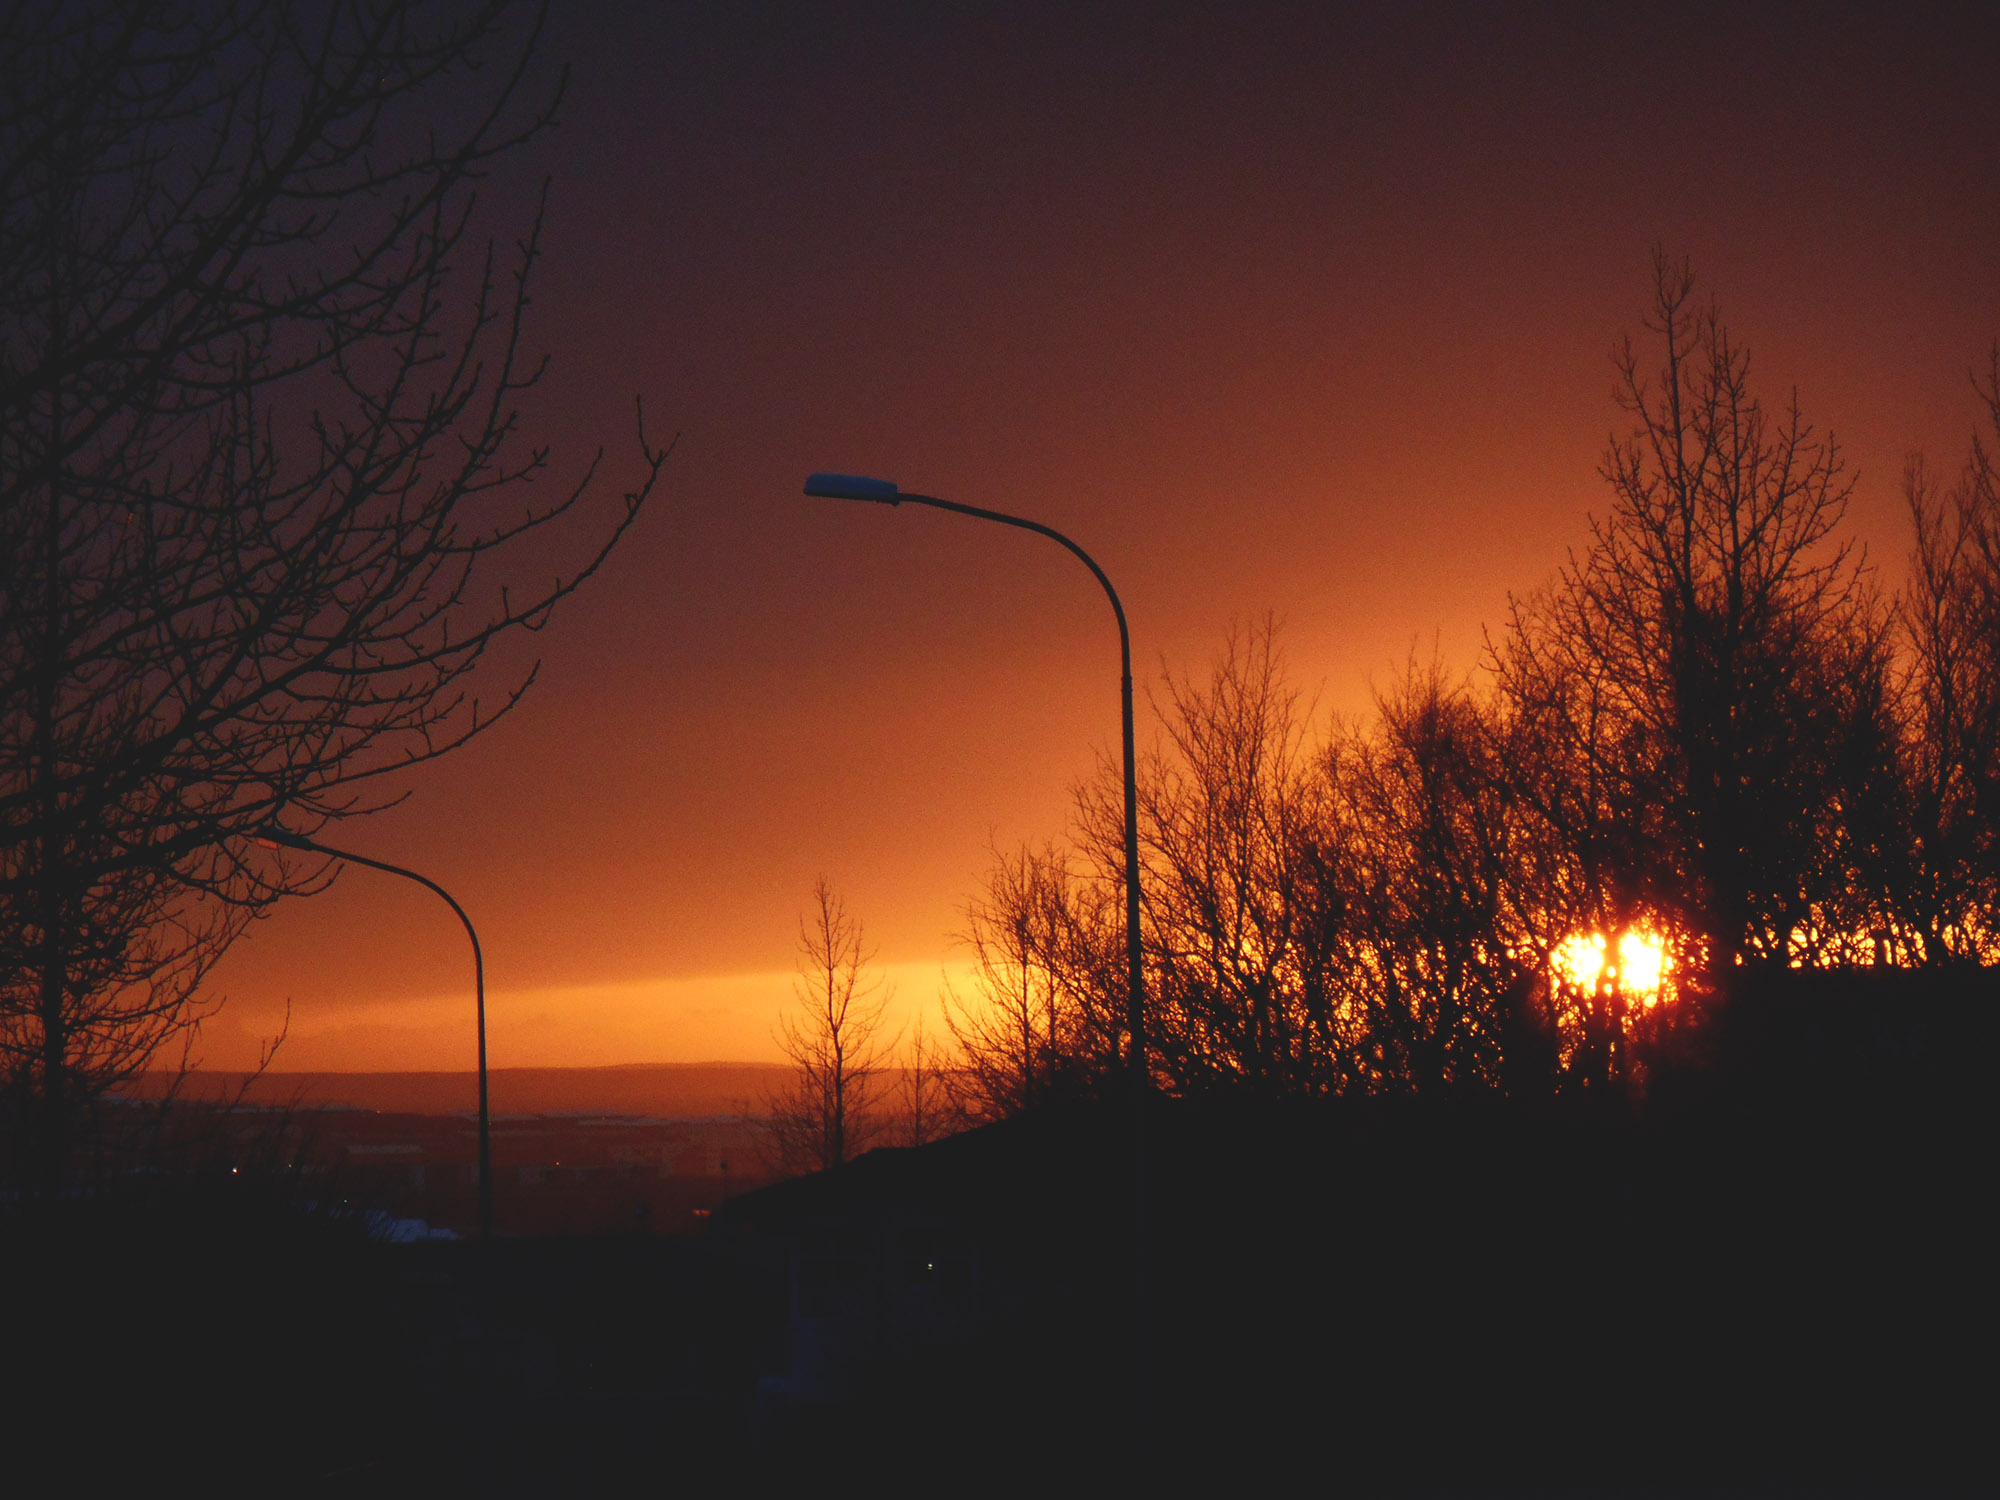 A Kópavogur Sunset | It All Started In Iceland...